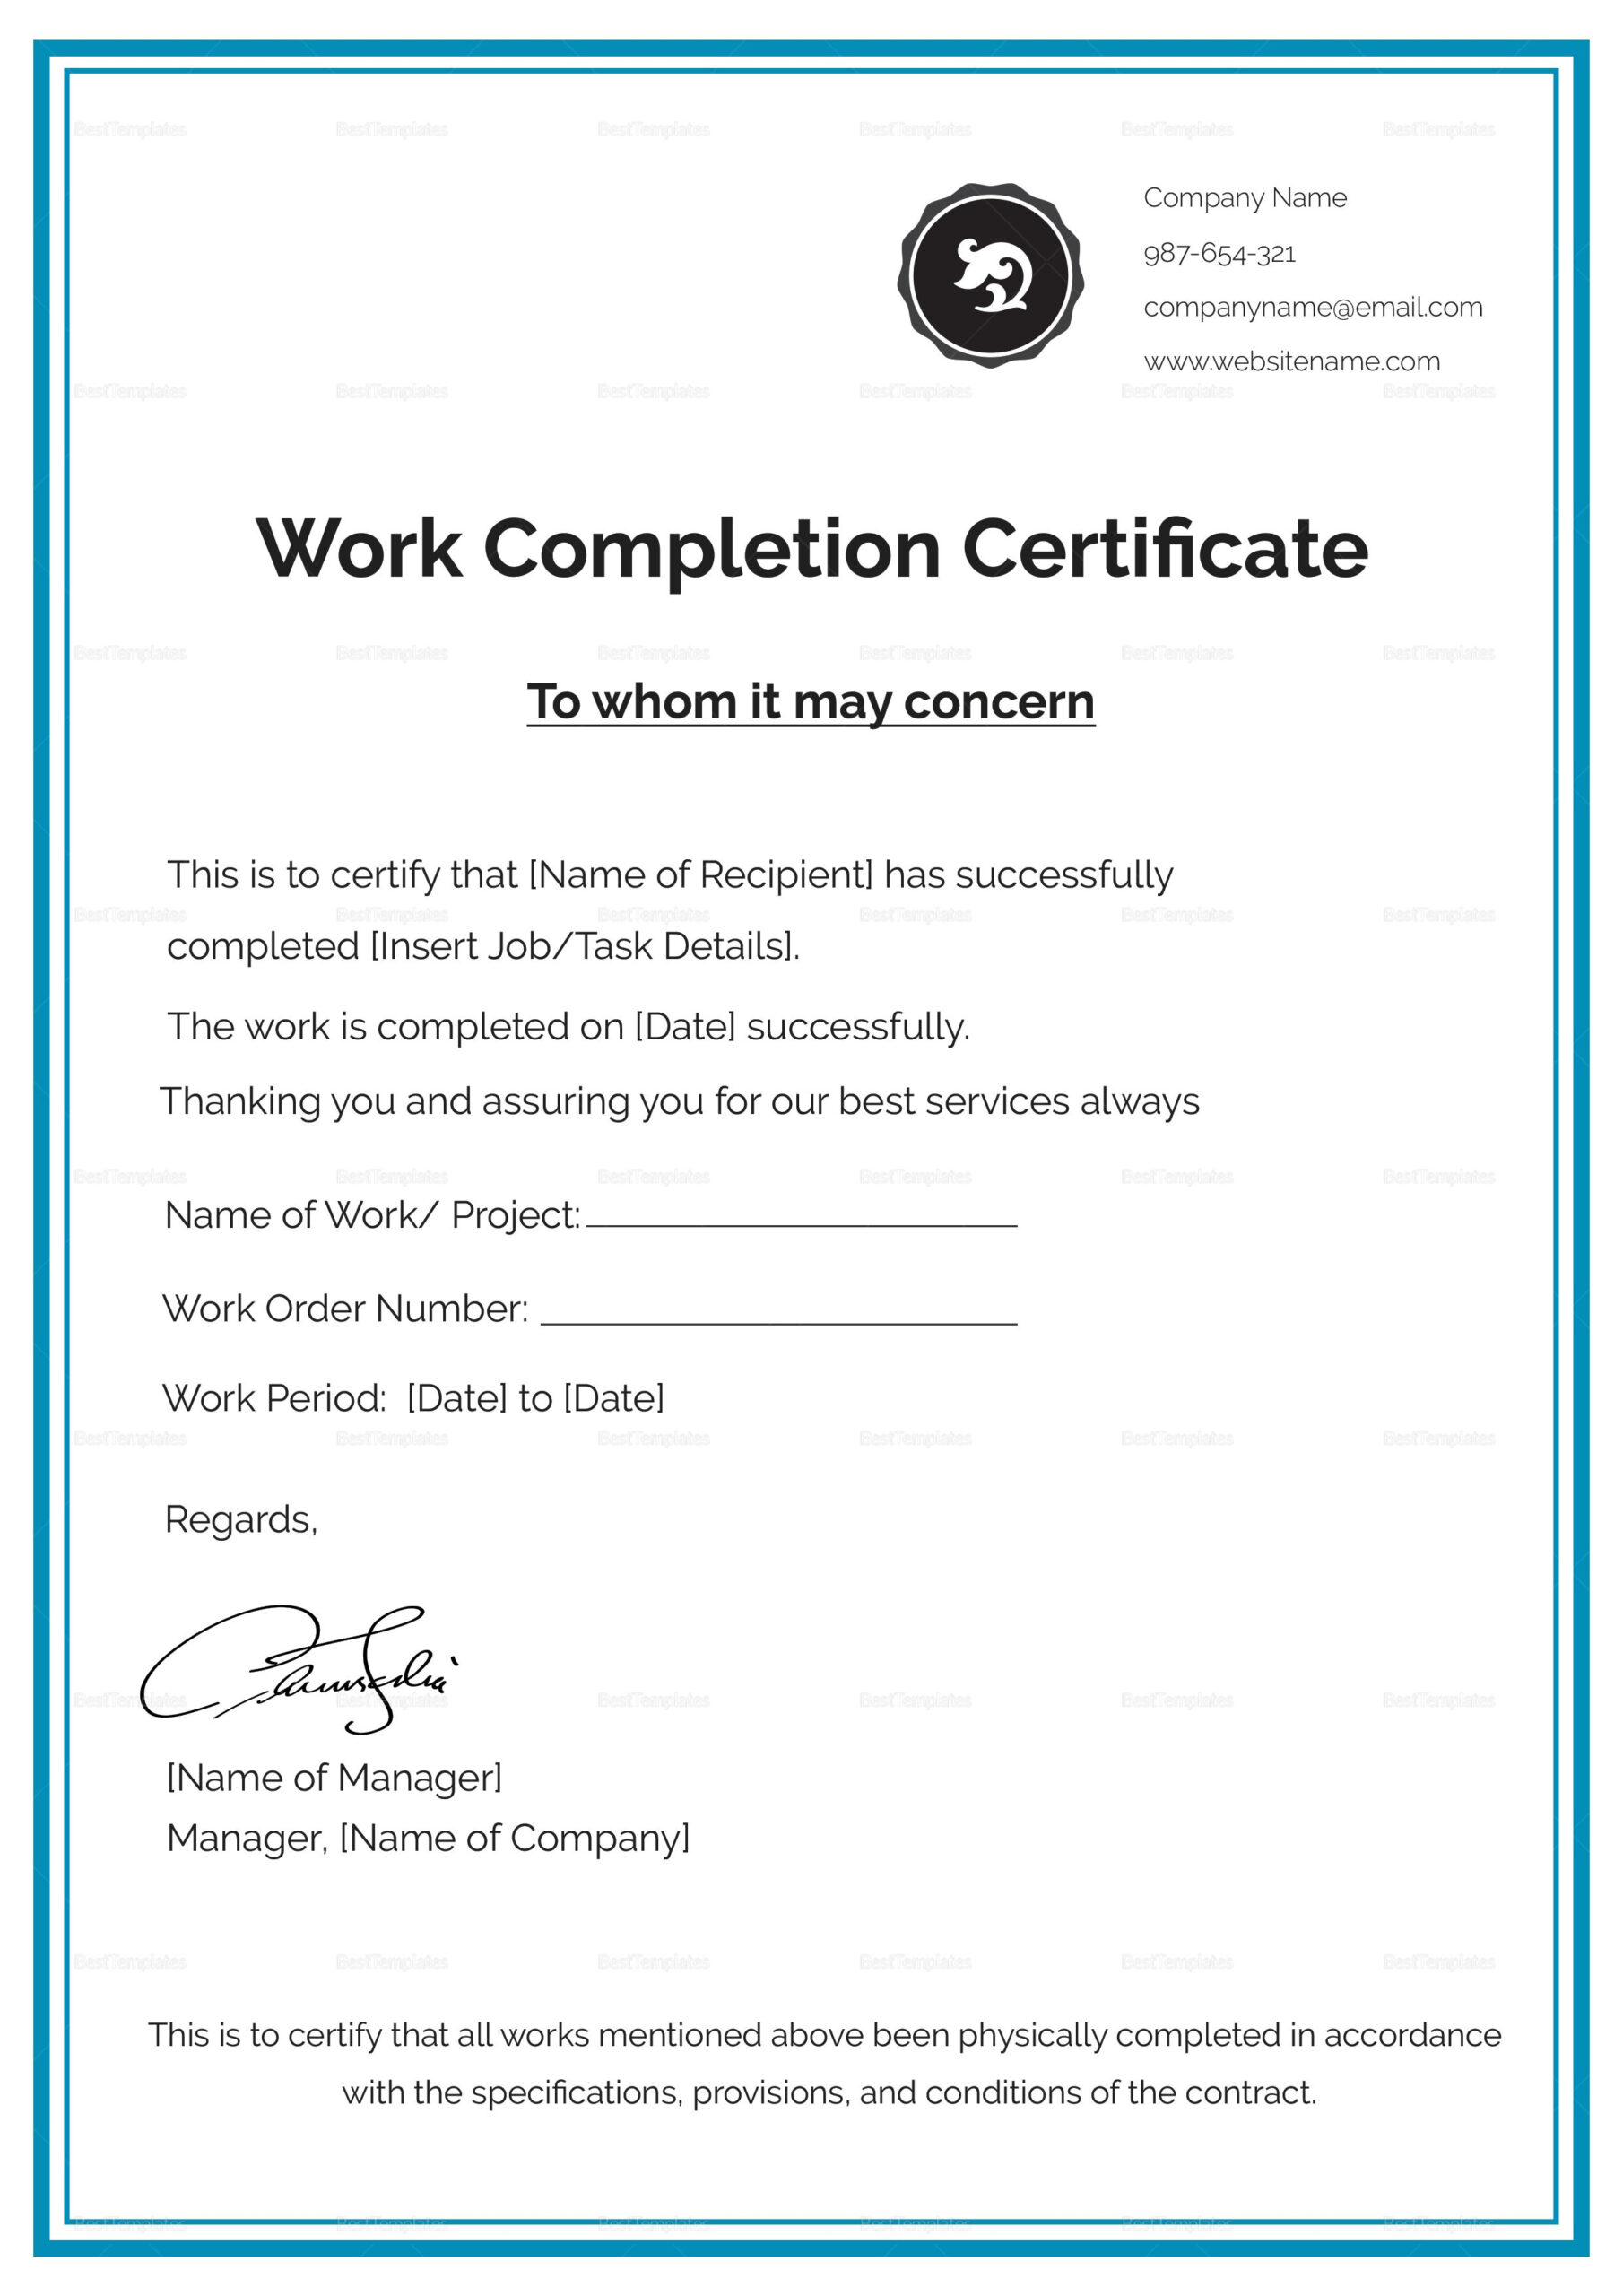 Work Completion Certificate Template In 2020 | Business For Certificate Template For Project Completion